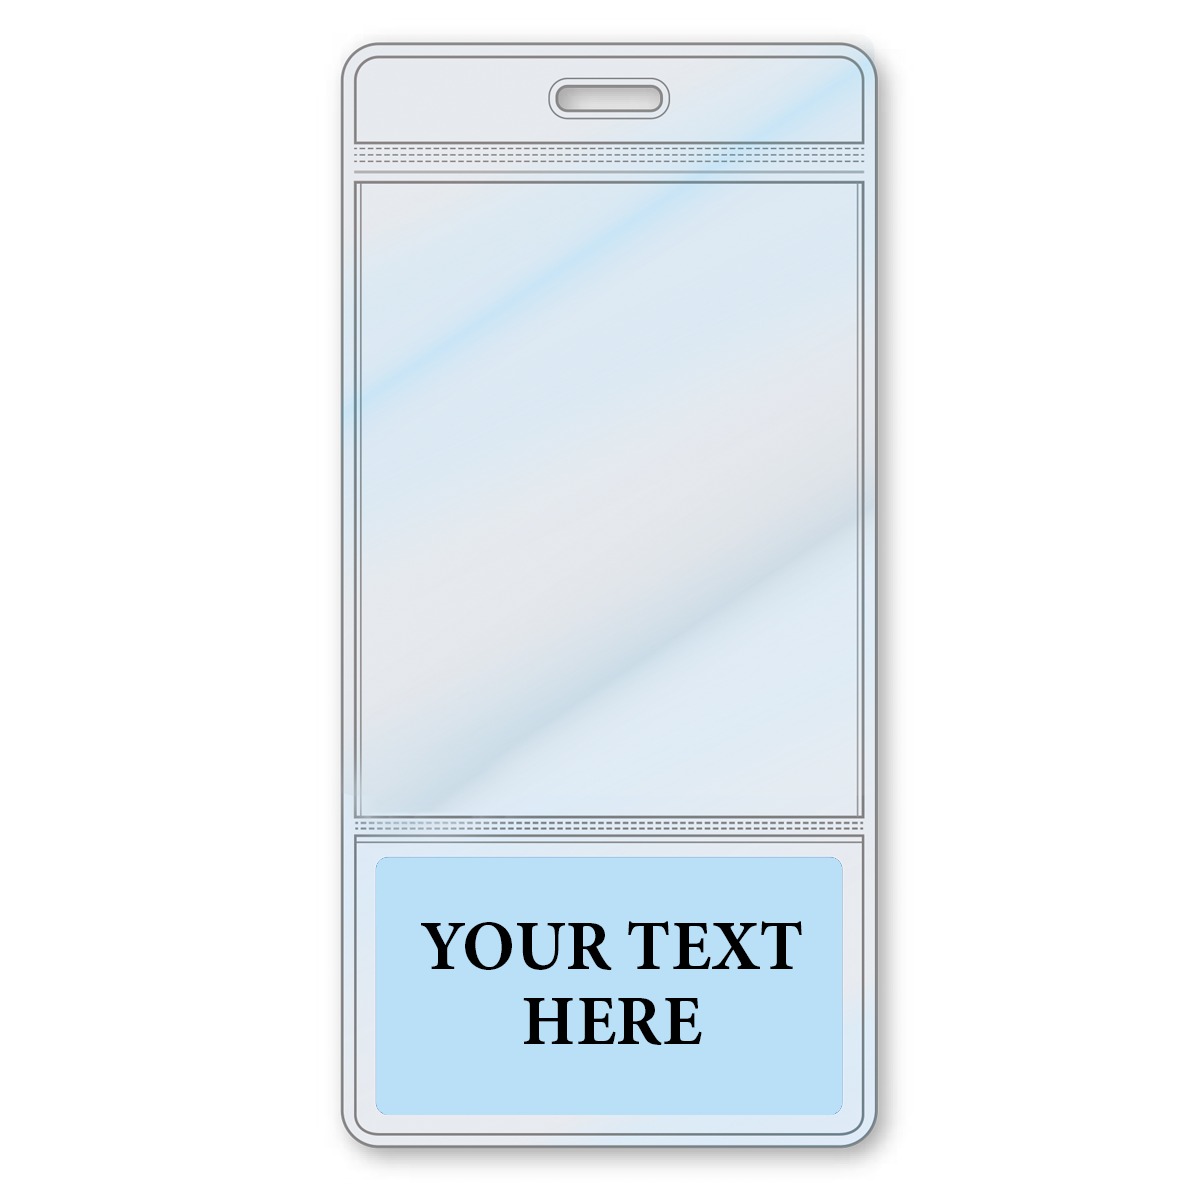 An empty Custom Printed BadgeBottoms® Vertical (Badge Holder & Badge Buddy IN ONE!!) with "YOUR TEXT HERE" written in a blue space at the bottom.